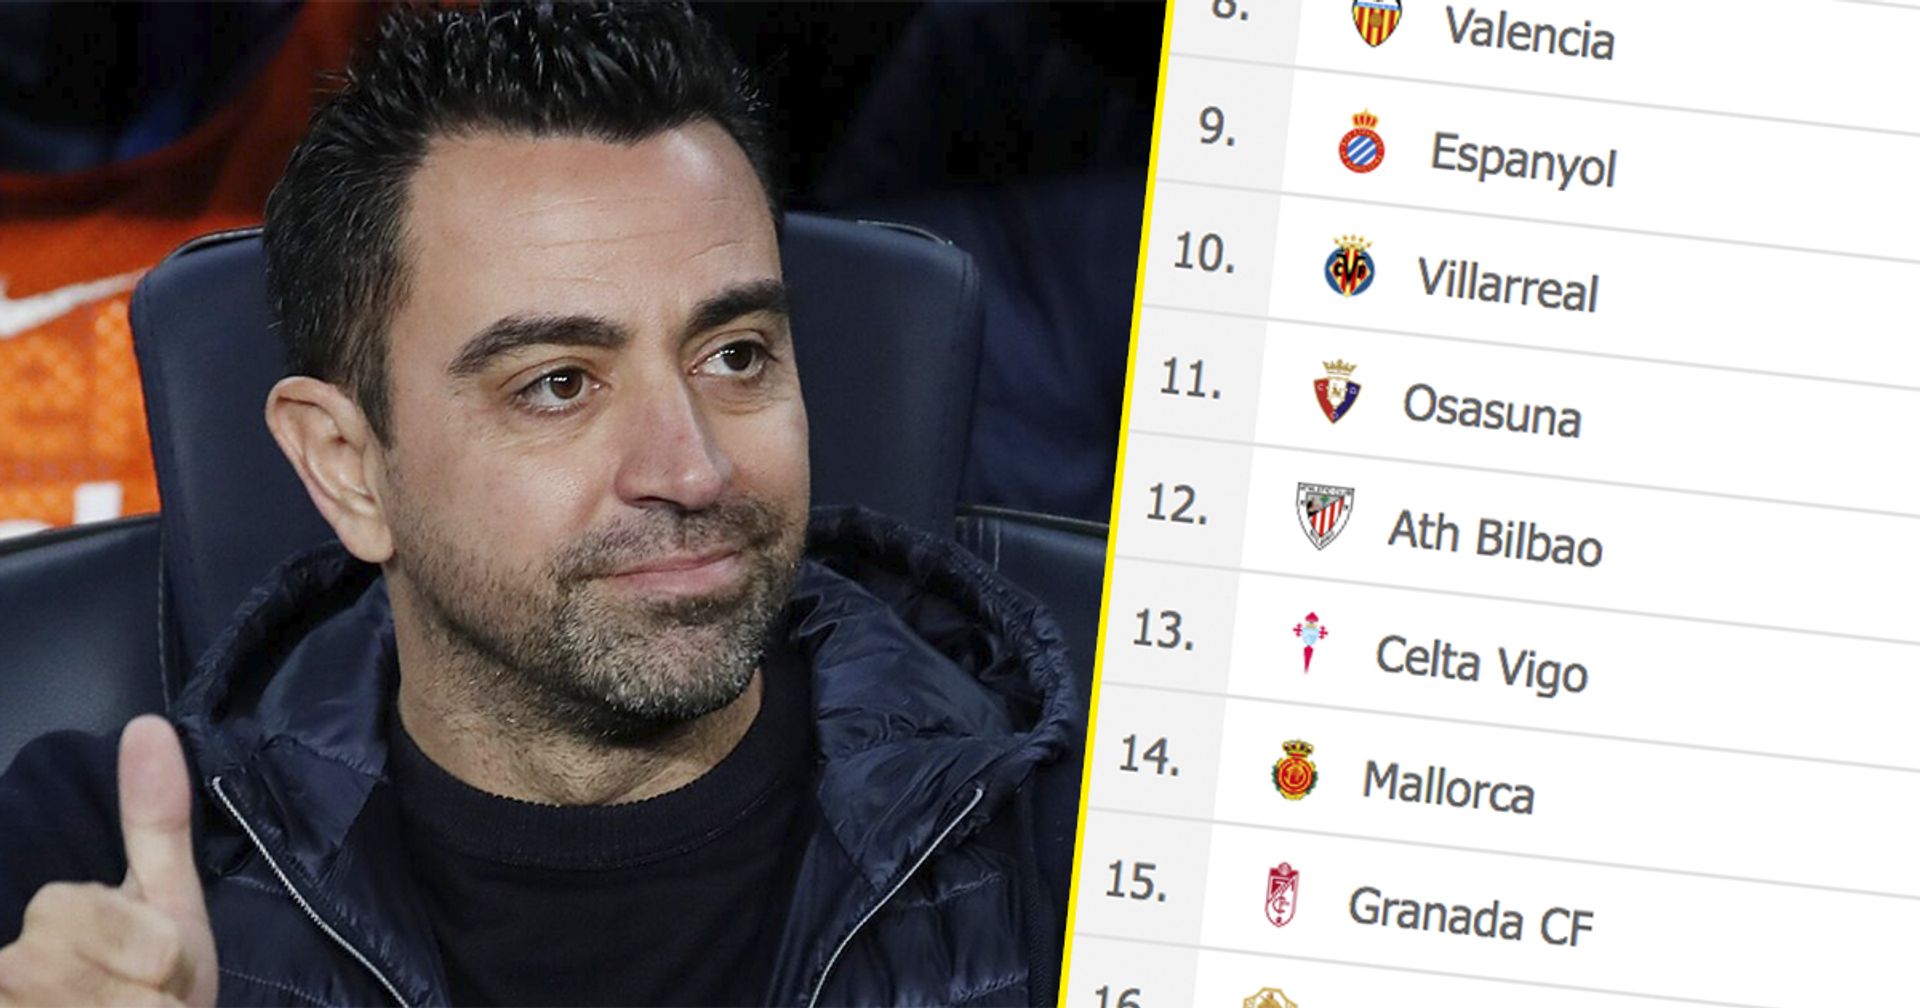 Barca just 3 points behind Champions League spot as Atletico lose: La Liga standings